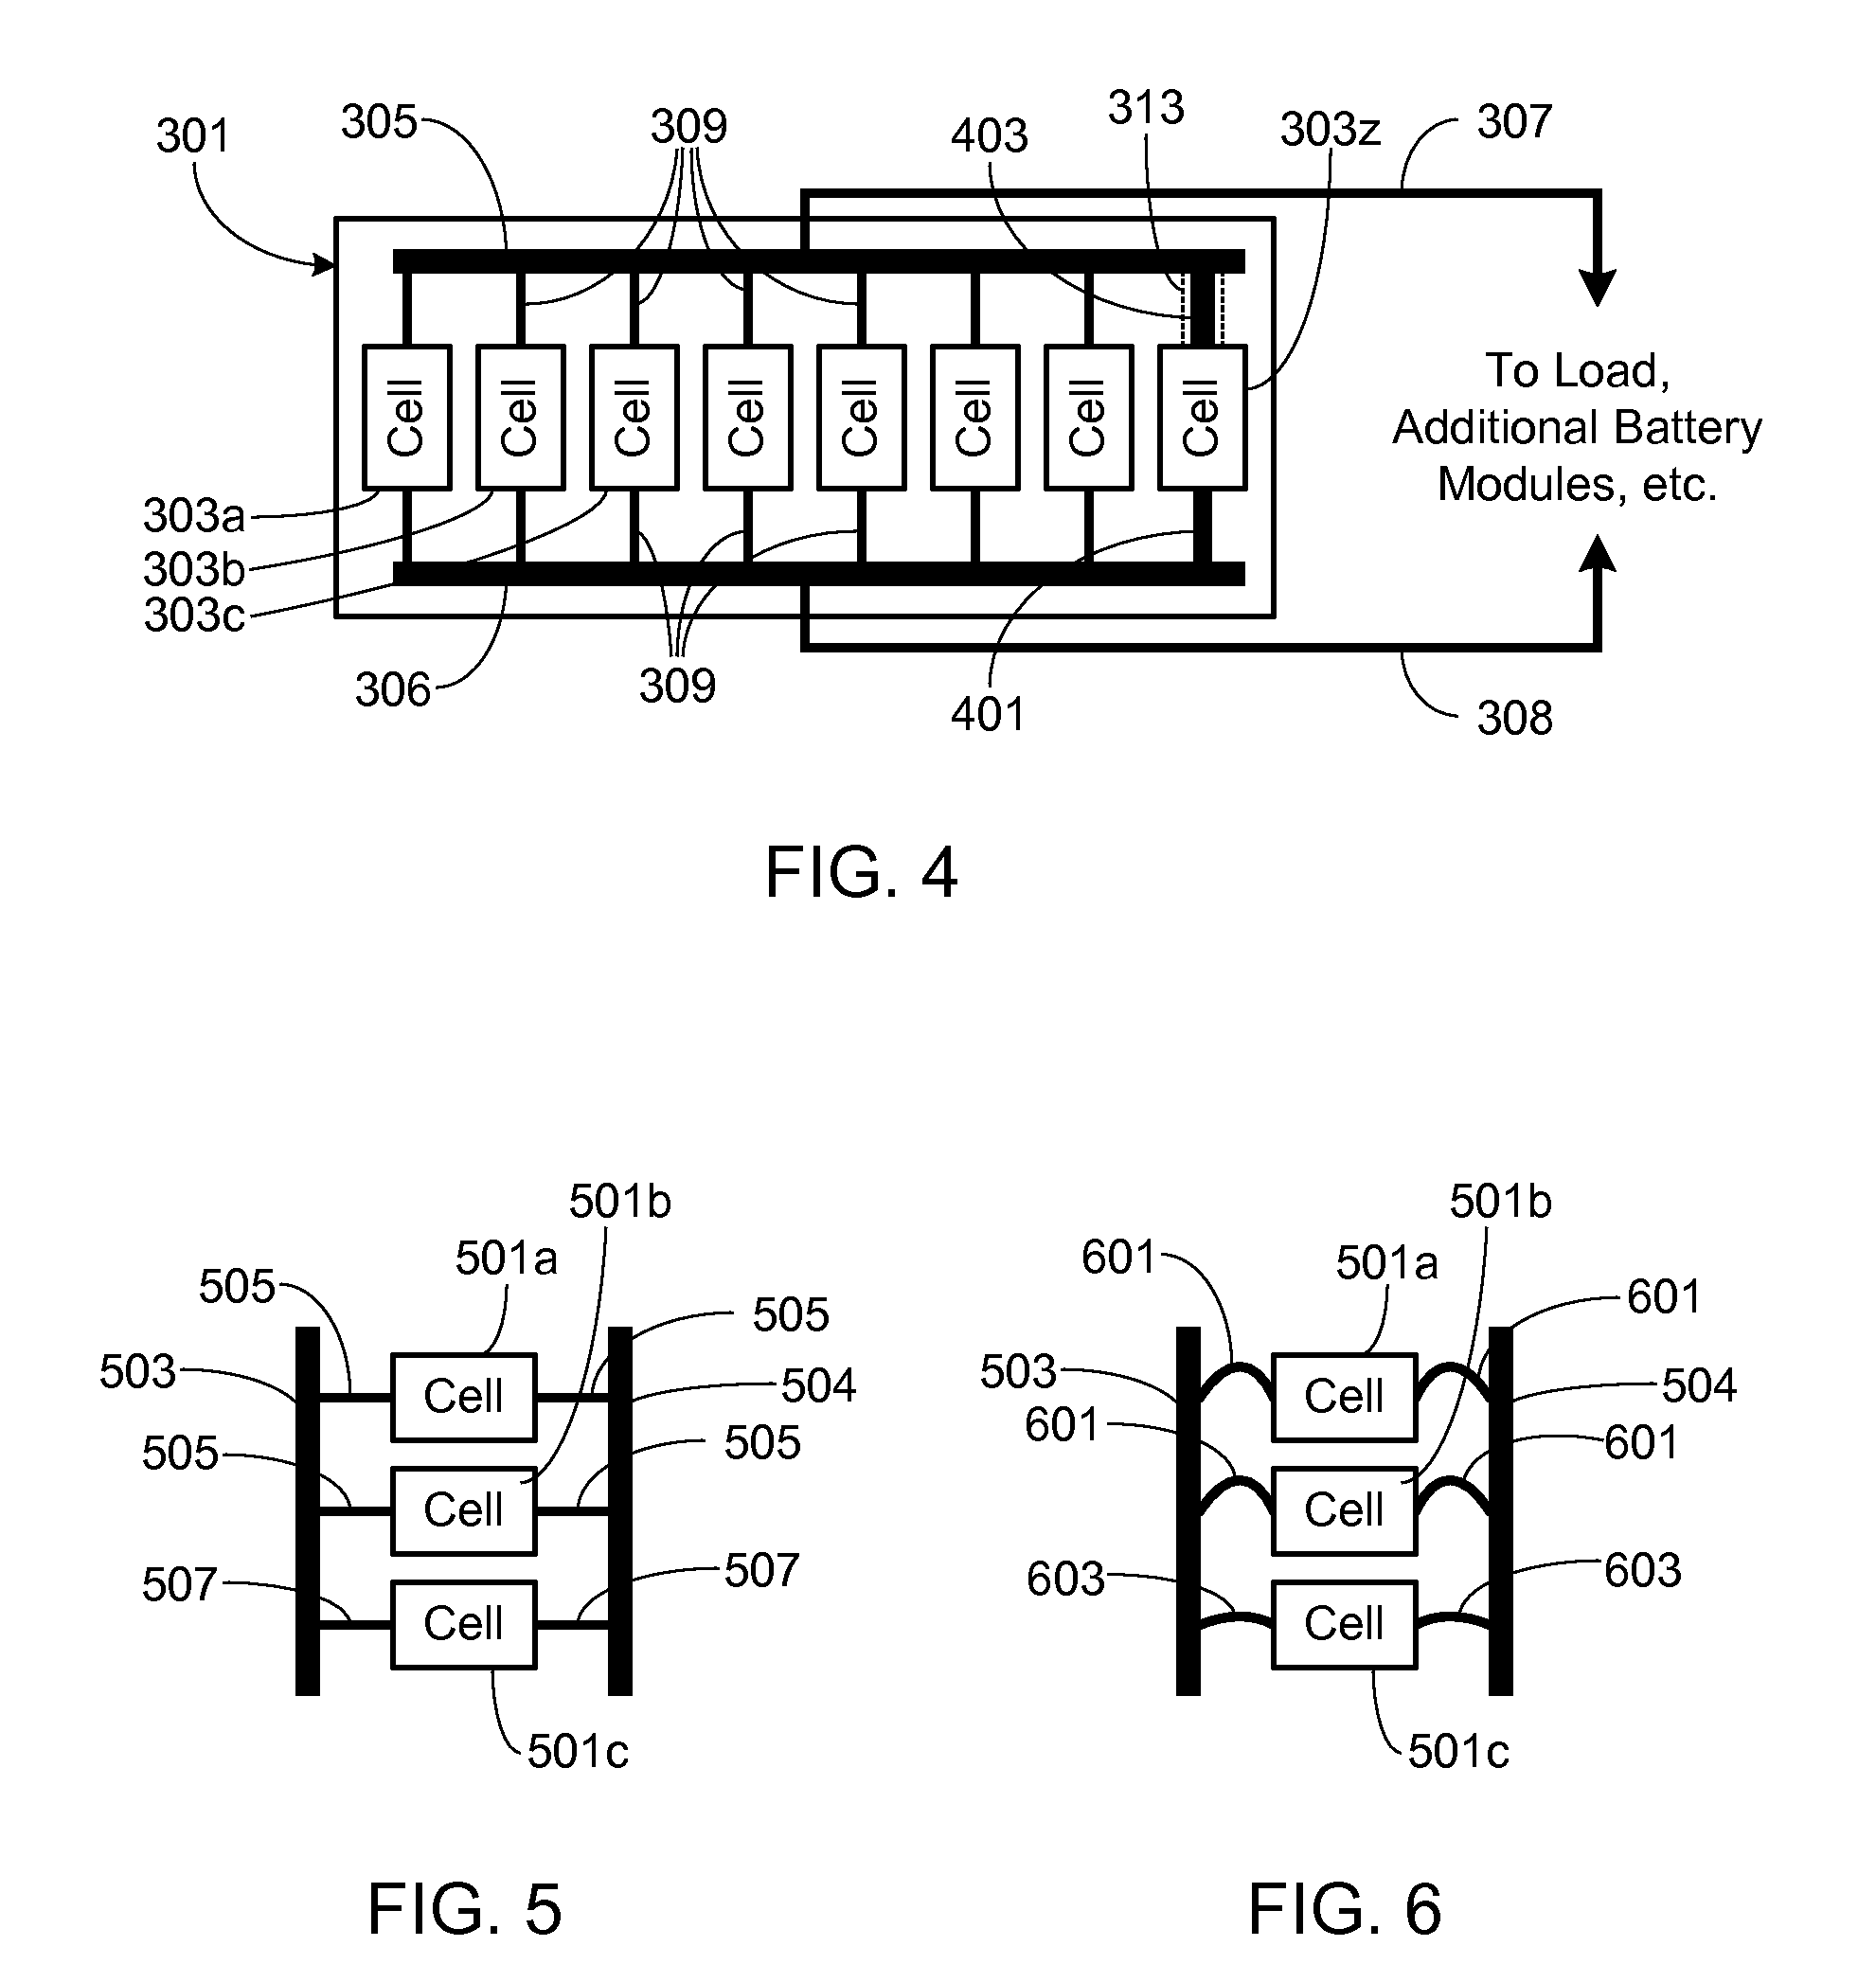 Method of controlled cell-level fusing within a battery pack